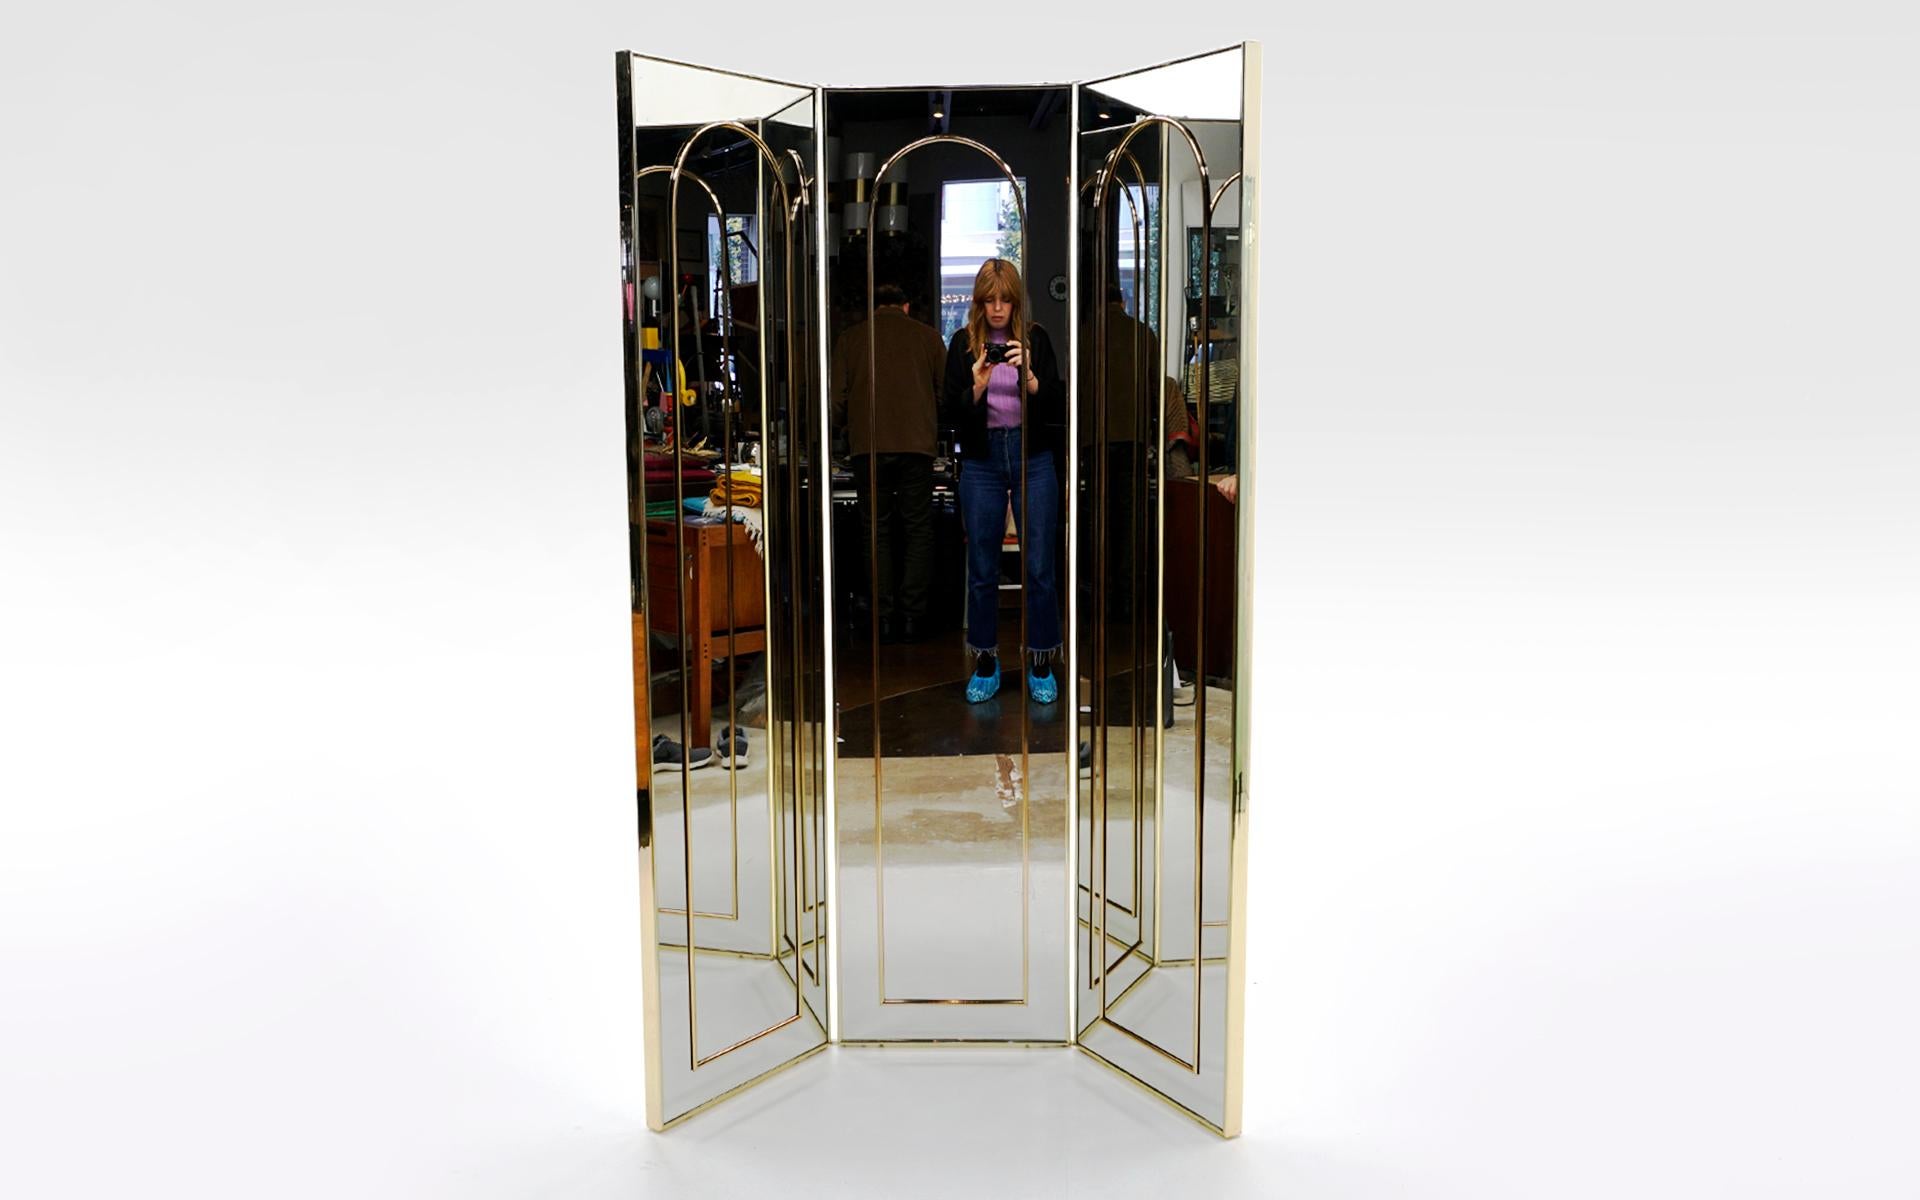 Tri-fold, two sided, floor standing dressing mirror, 1970s. Entirely framed in brass, one side has brass arch detail in the mirror and the other side is all mirror. The mirror can be folded either direction. Lots of options using this mirror as both